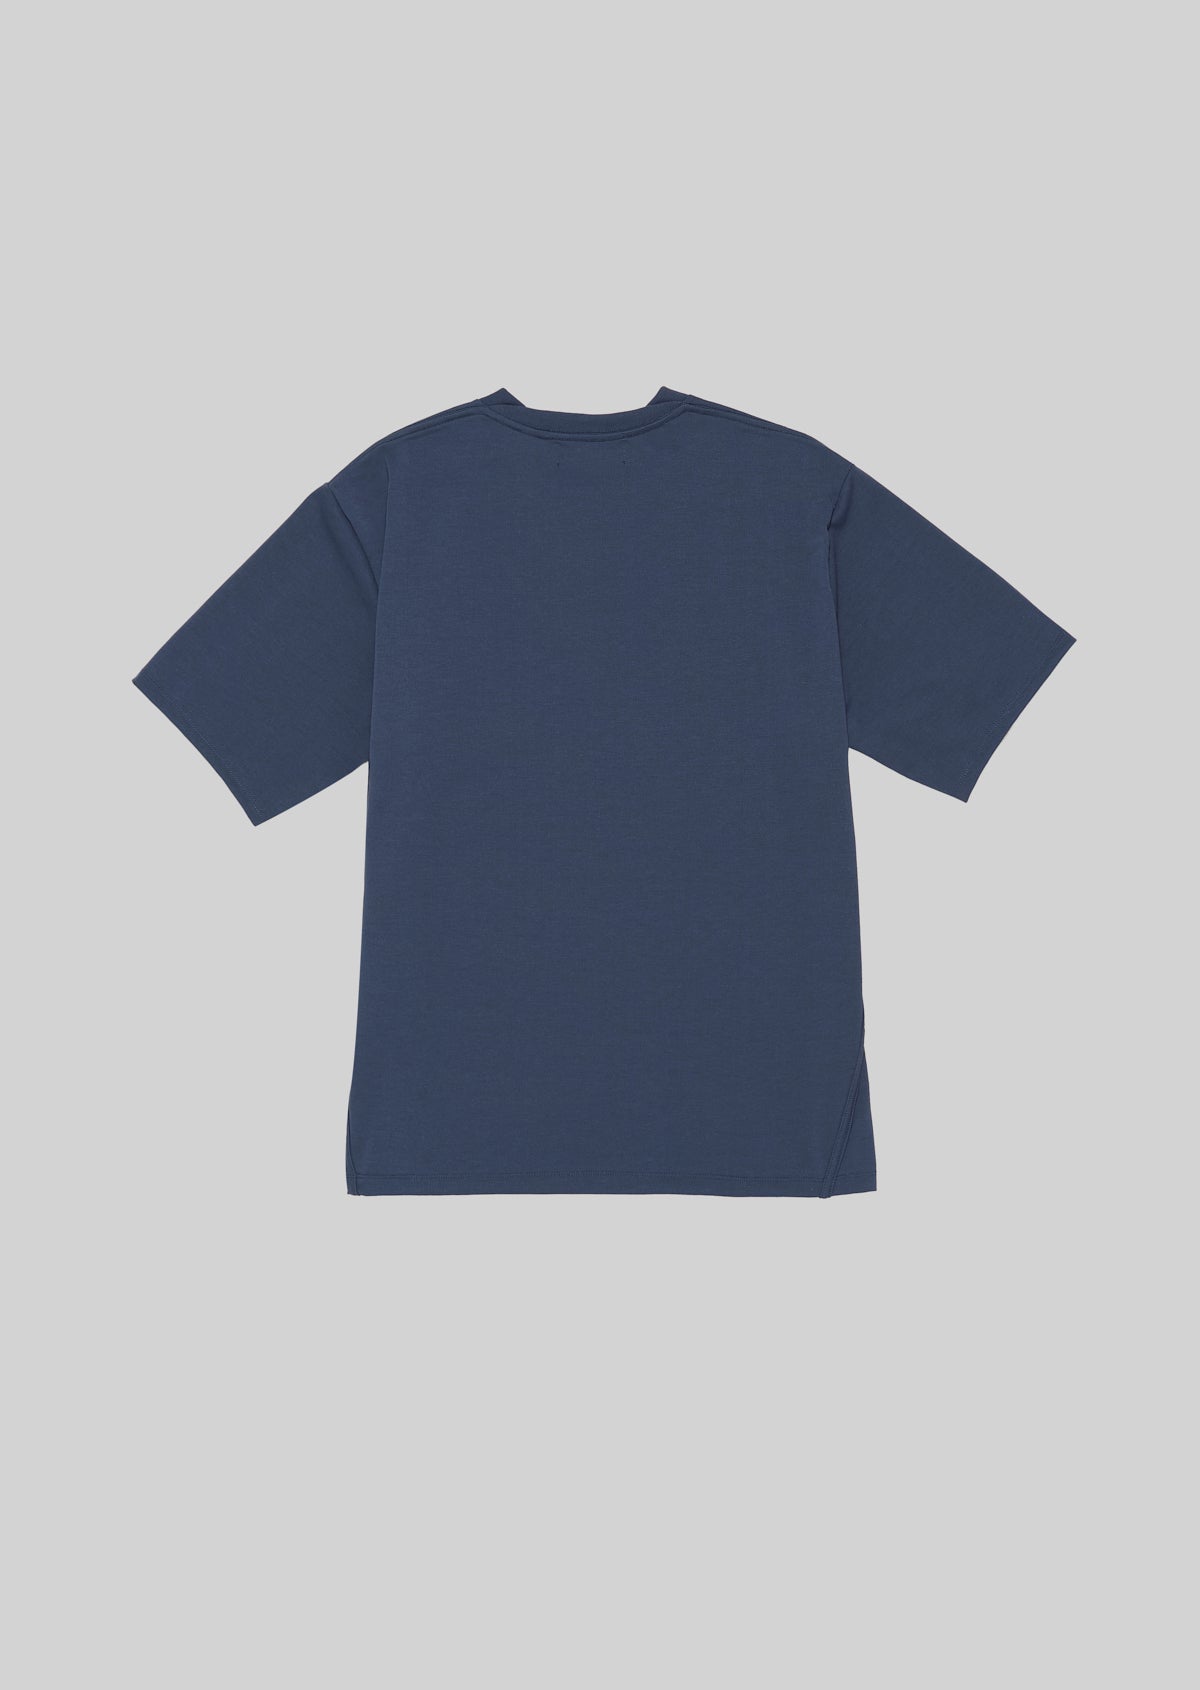 POLYESTER COTTON FEEL T-SHIRT CHARCOAL GRAY　8001-1702